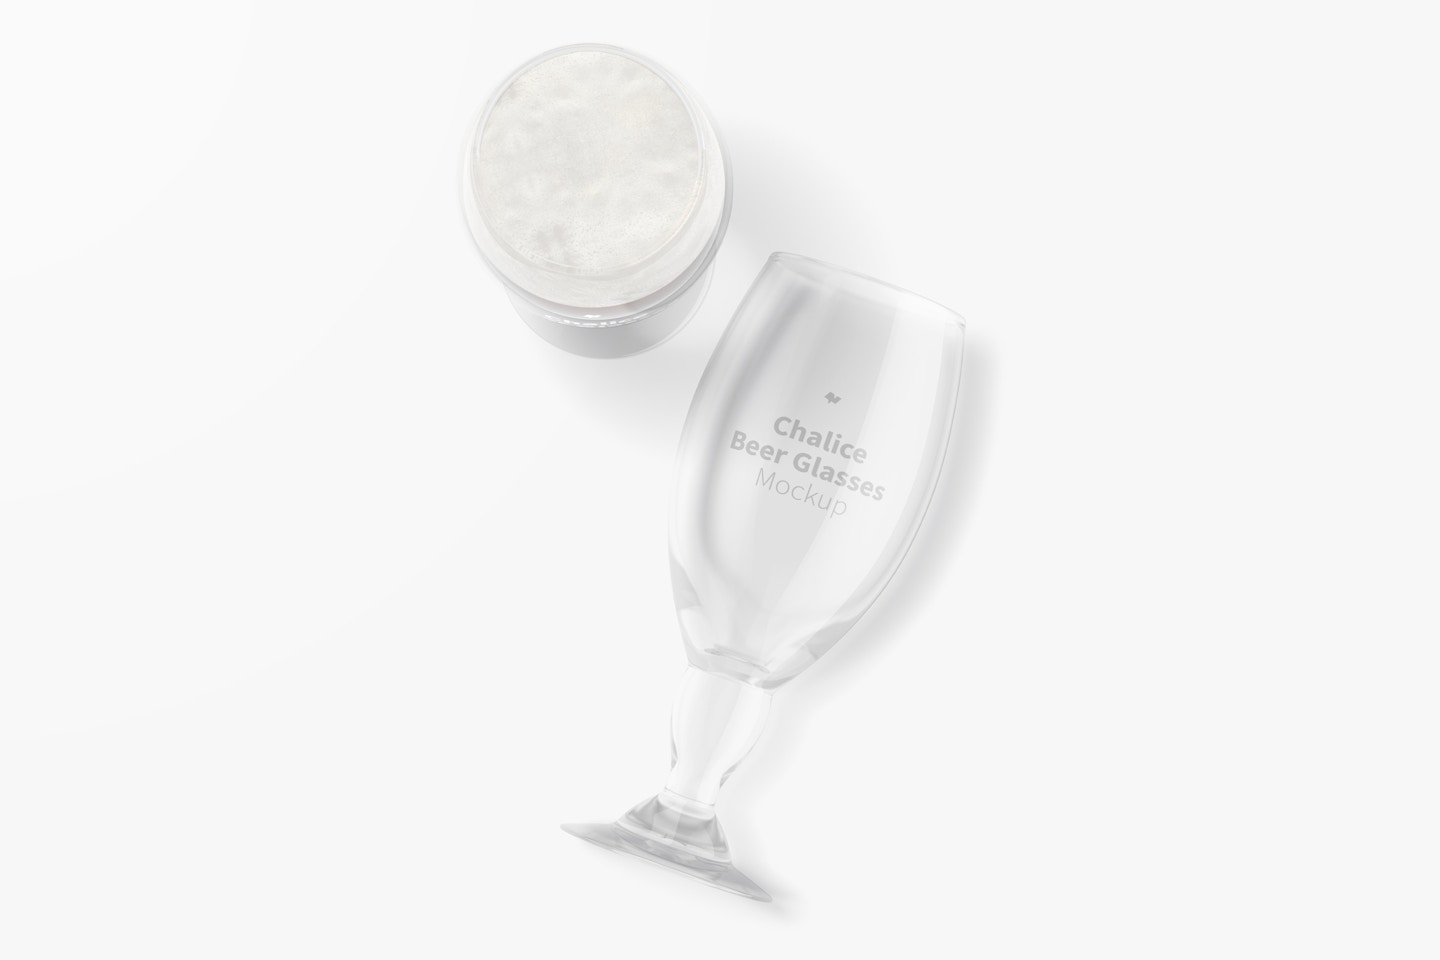 Chalice Beer Glass Mockup, Top View